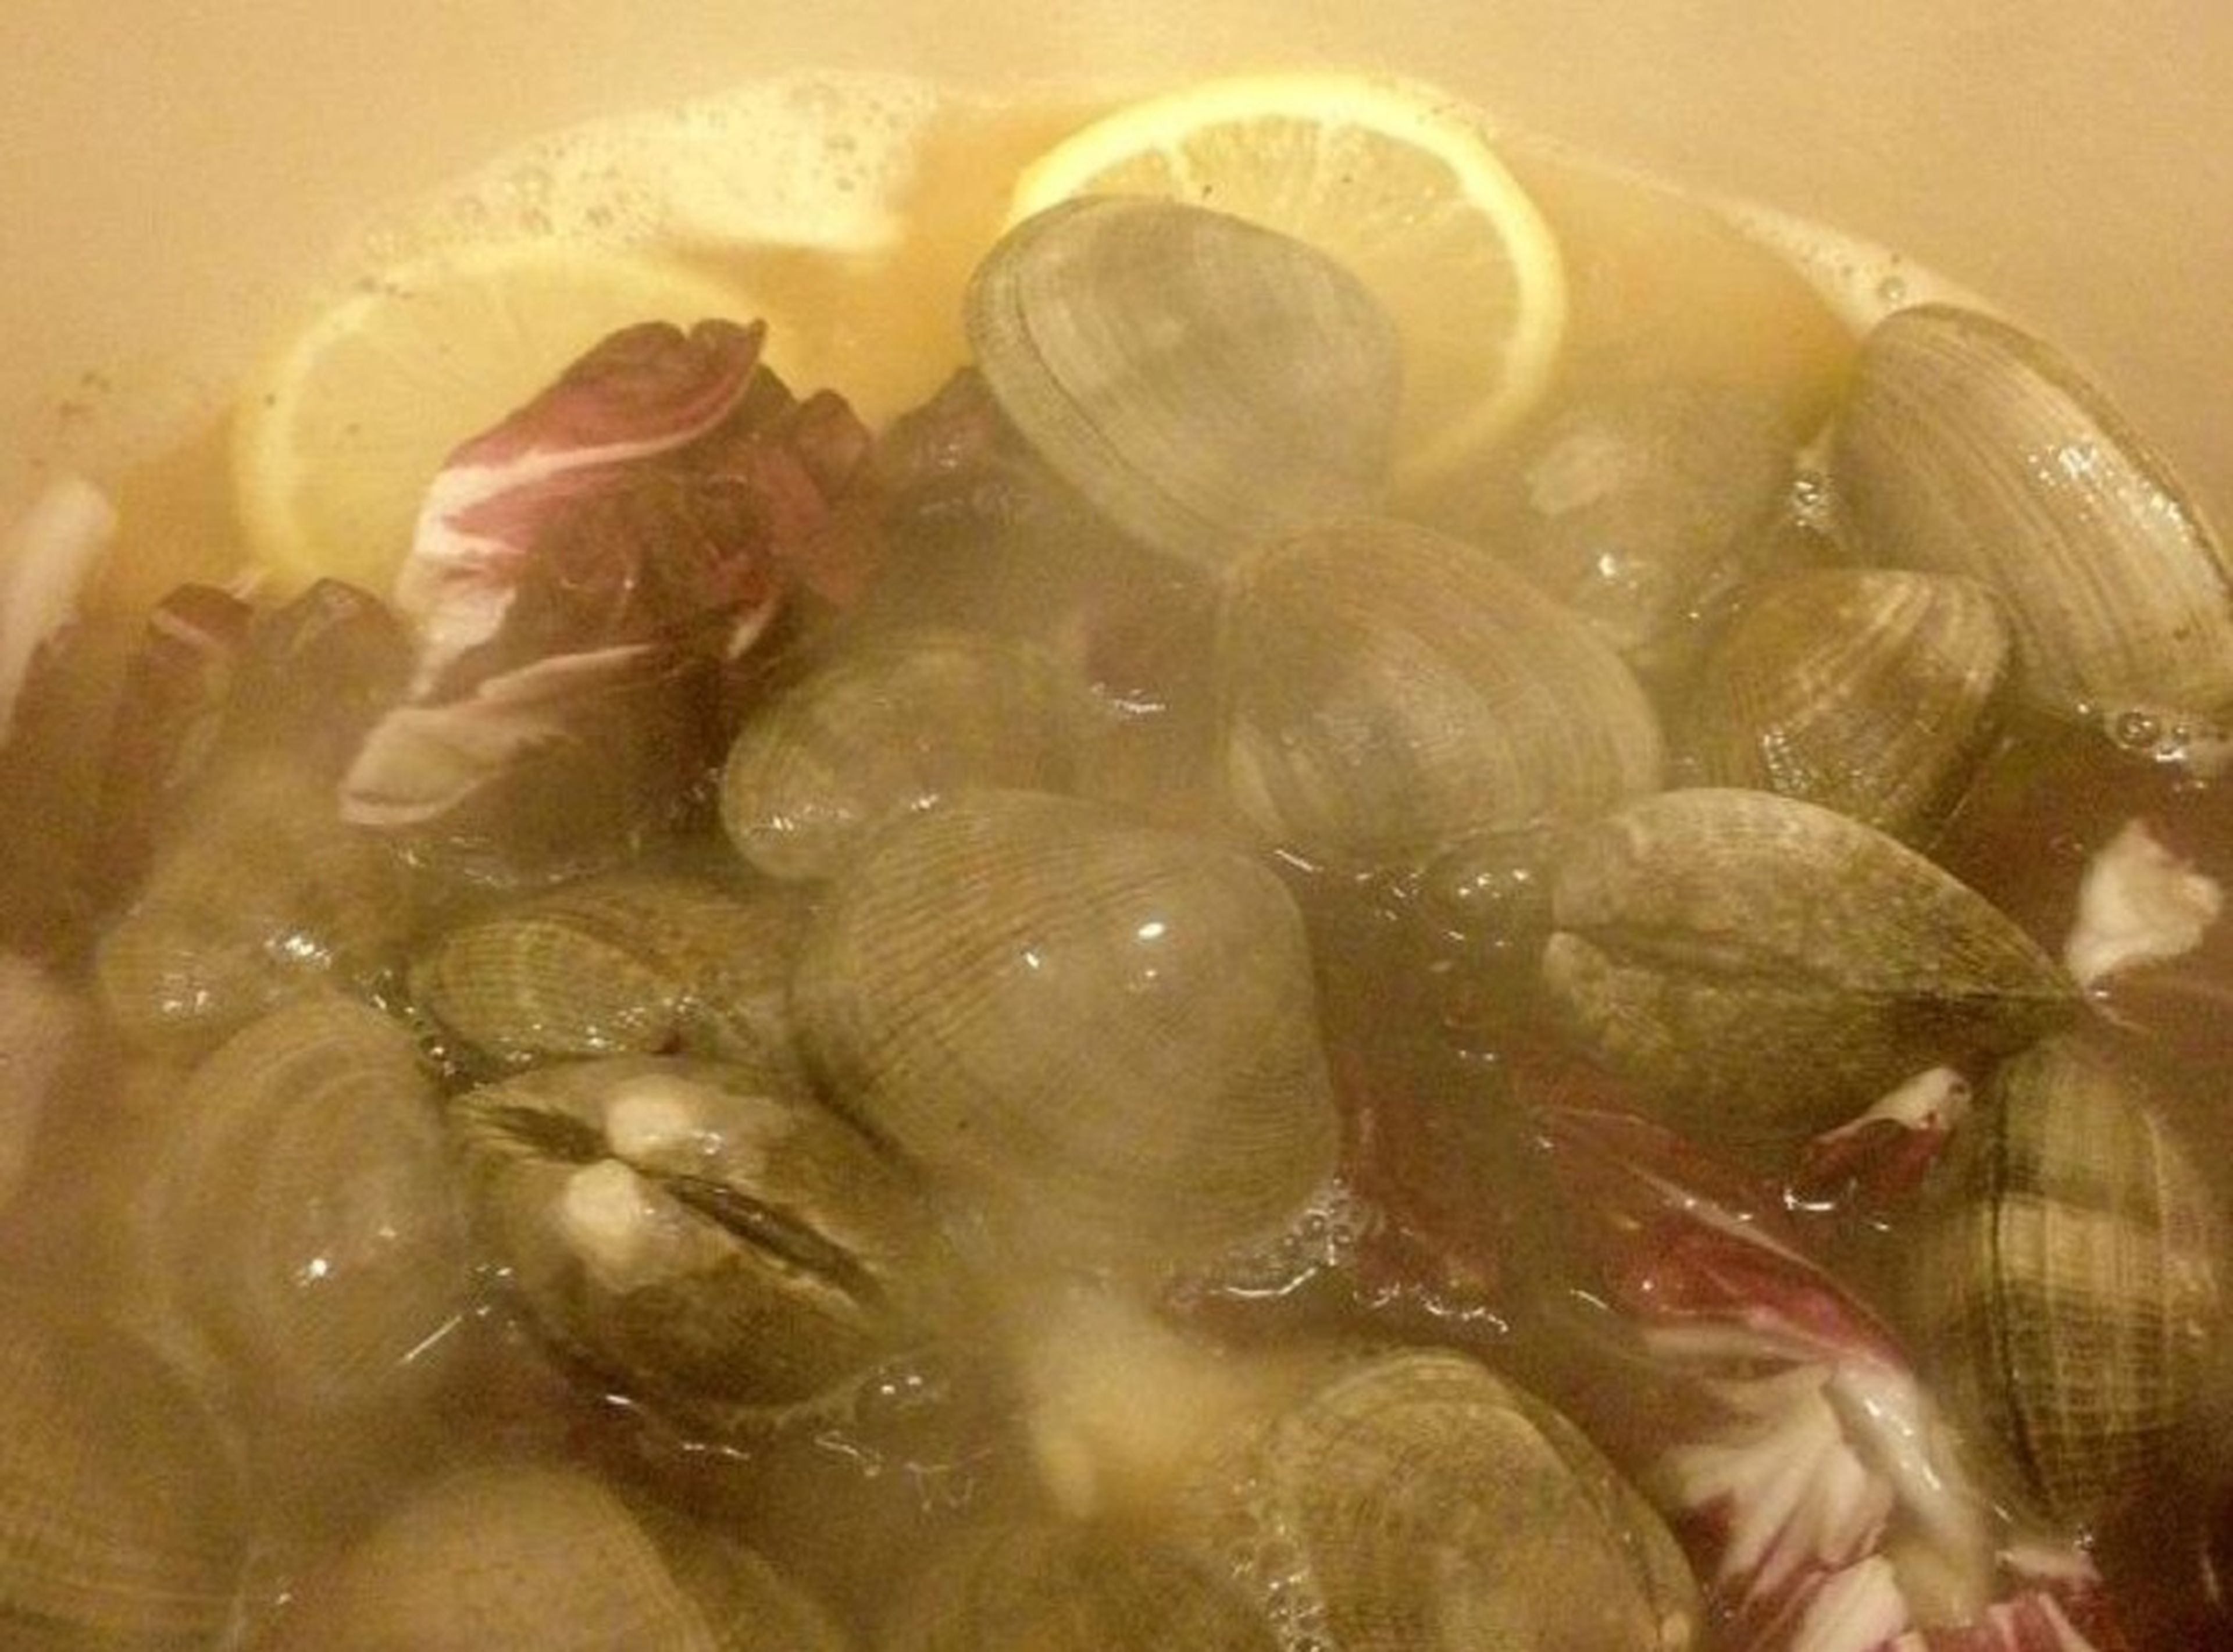 Add the clams and radicchio to the broth. Cook for about 15 min. until the clams open. Discard the clams that did not open.